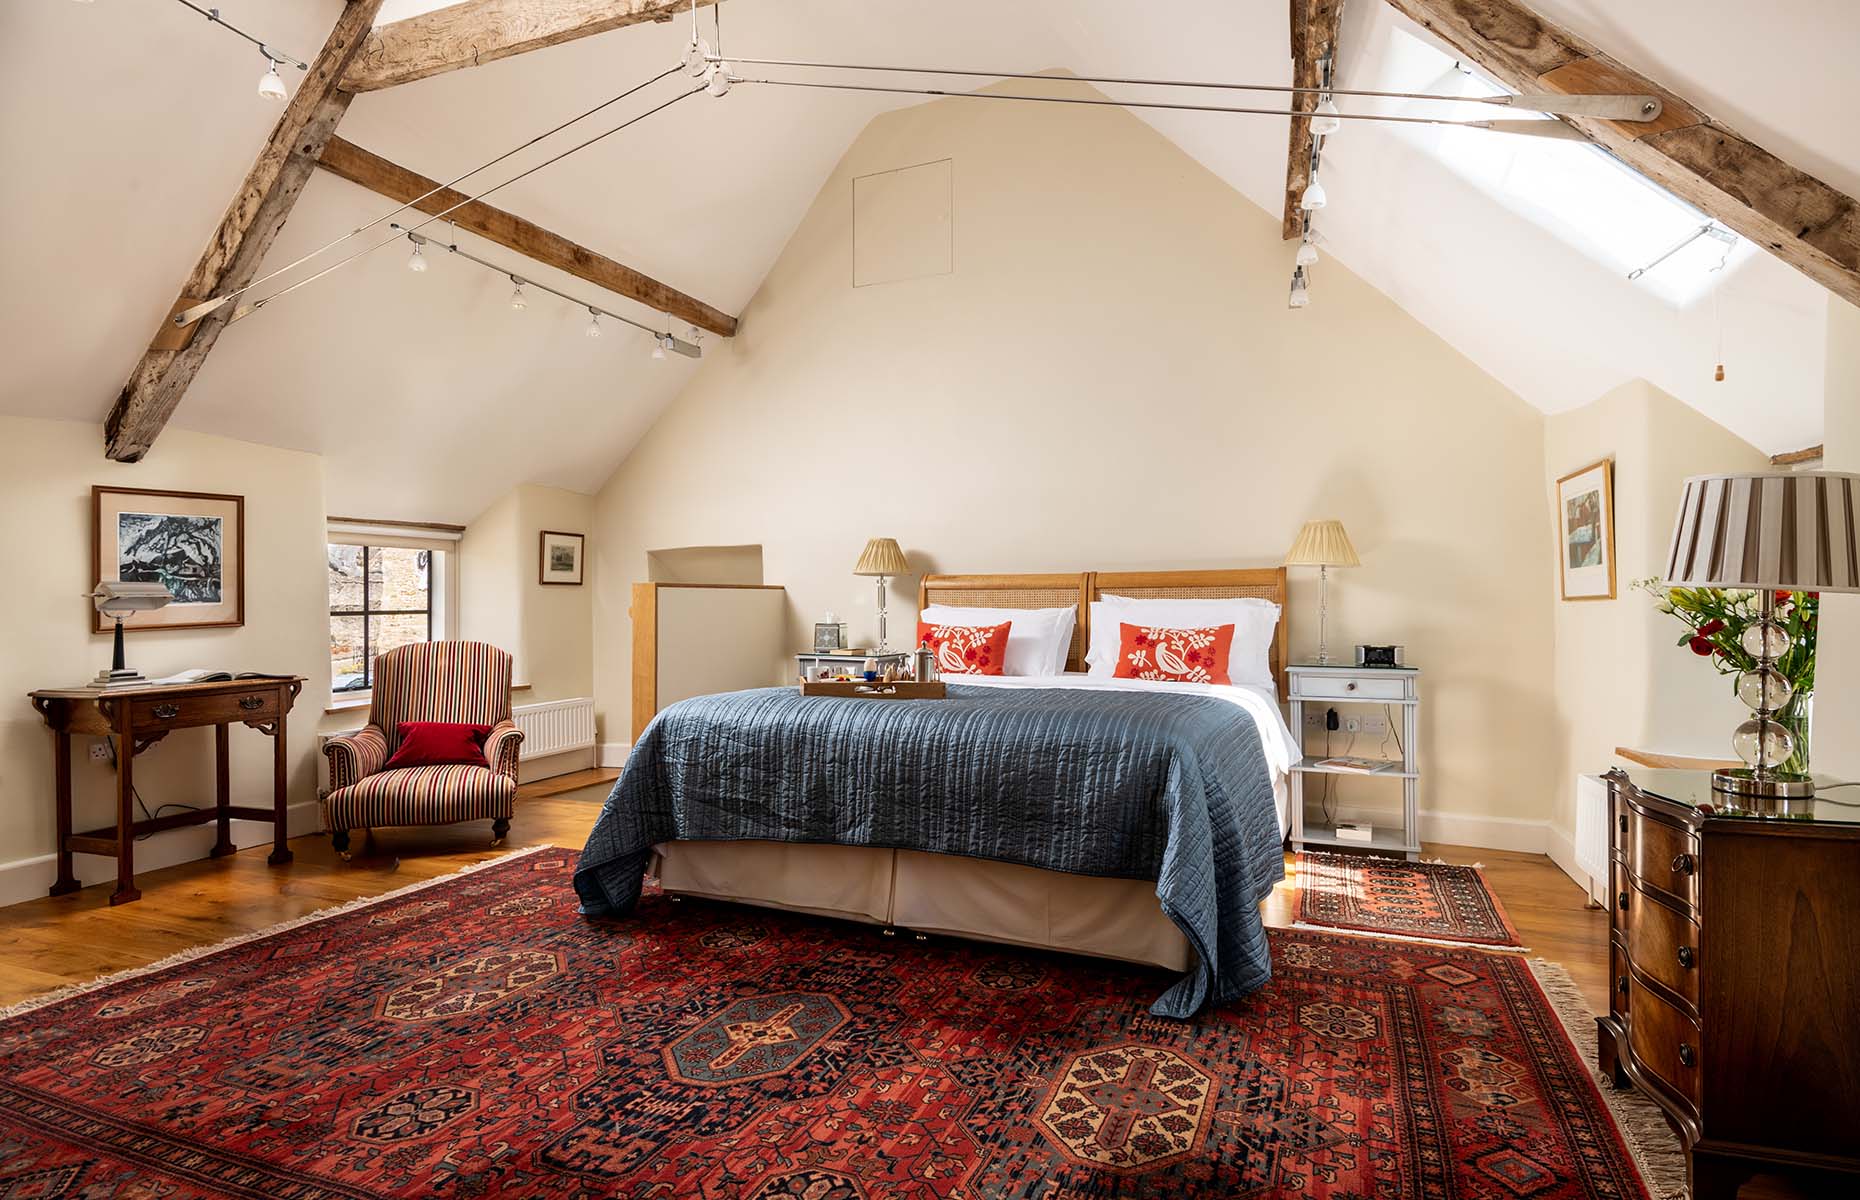 Bedroom in The Hayloft (Image: Courtesy of Hall Farm)